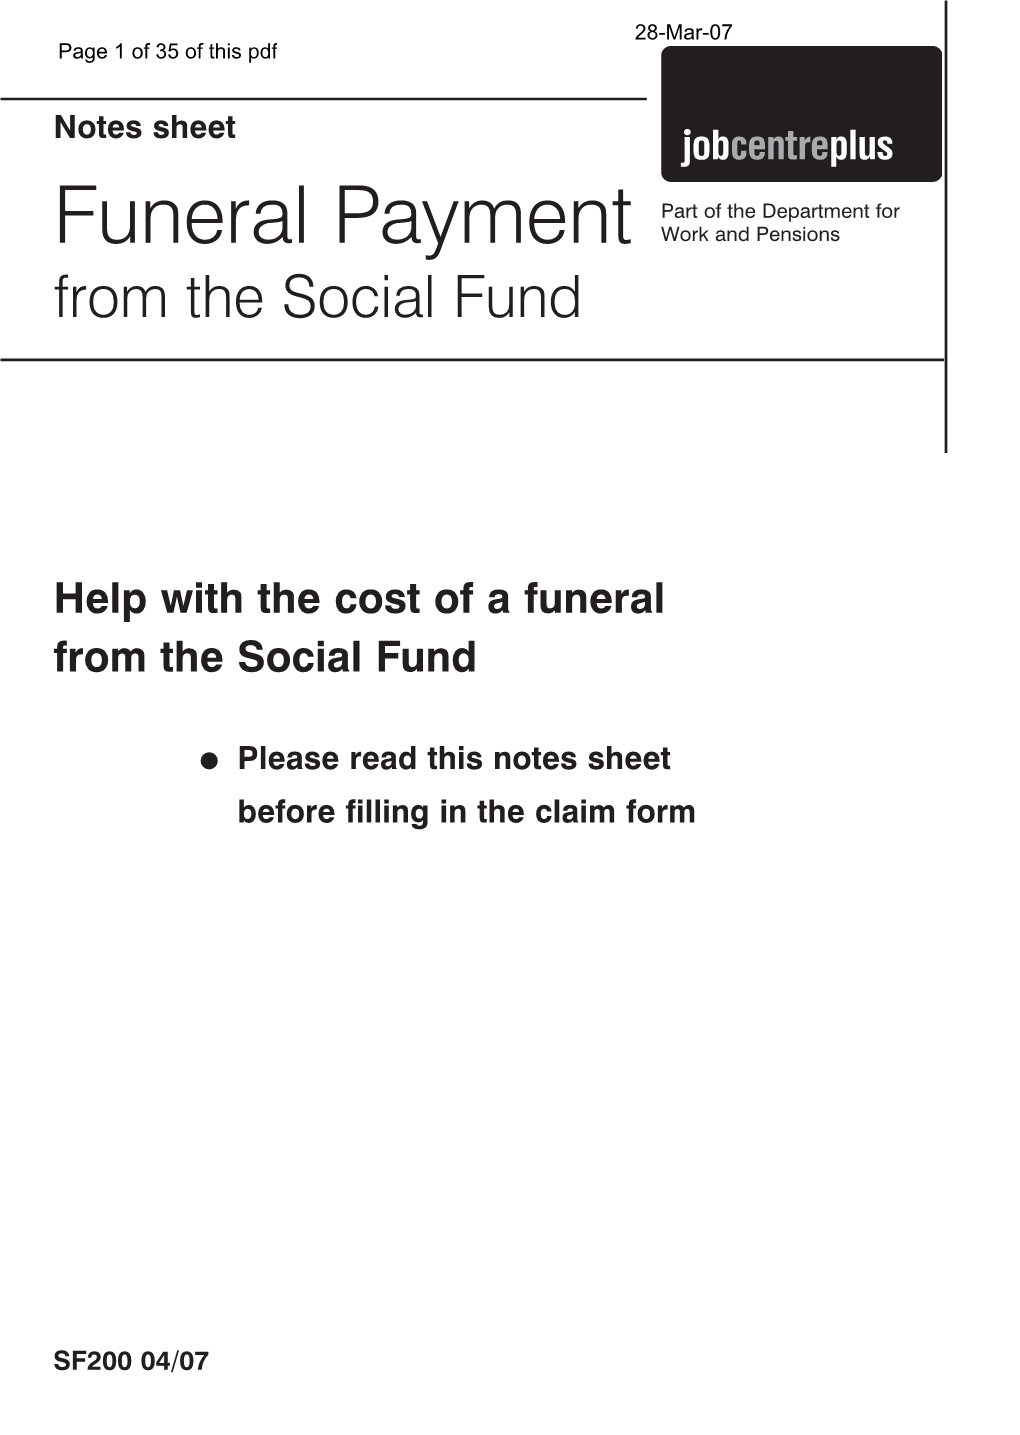 Funeral Payment Work and Pensions from the Social Fund